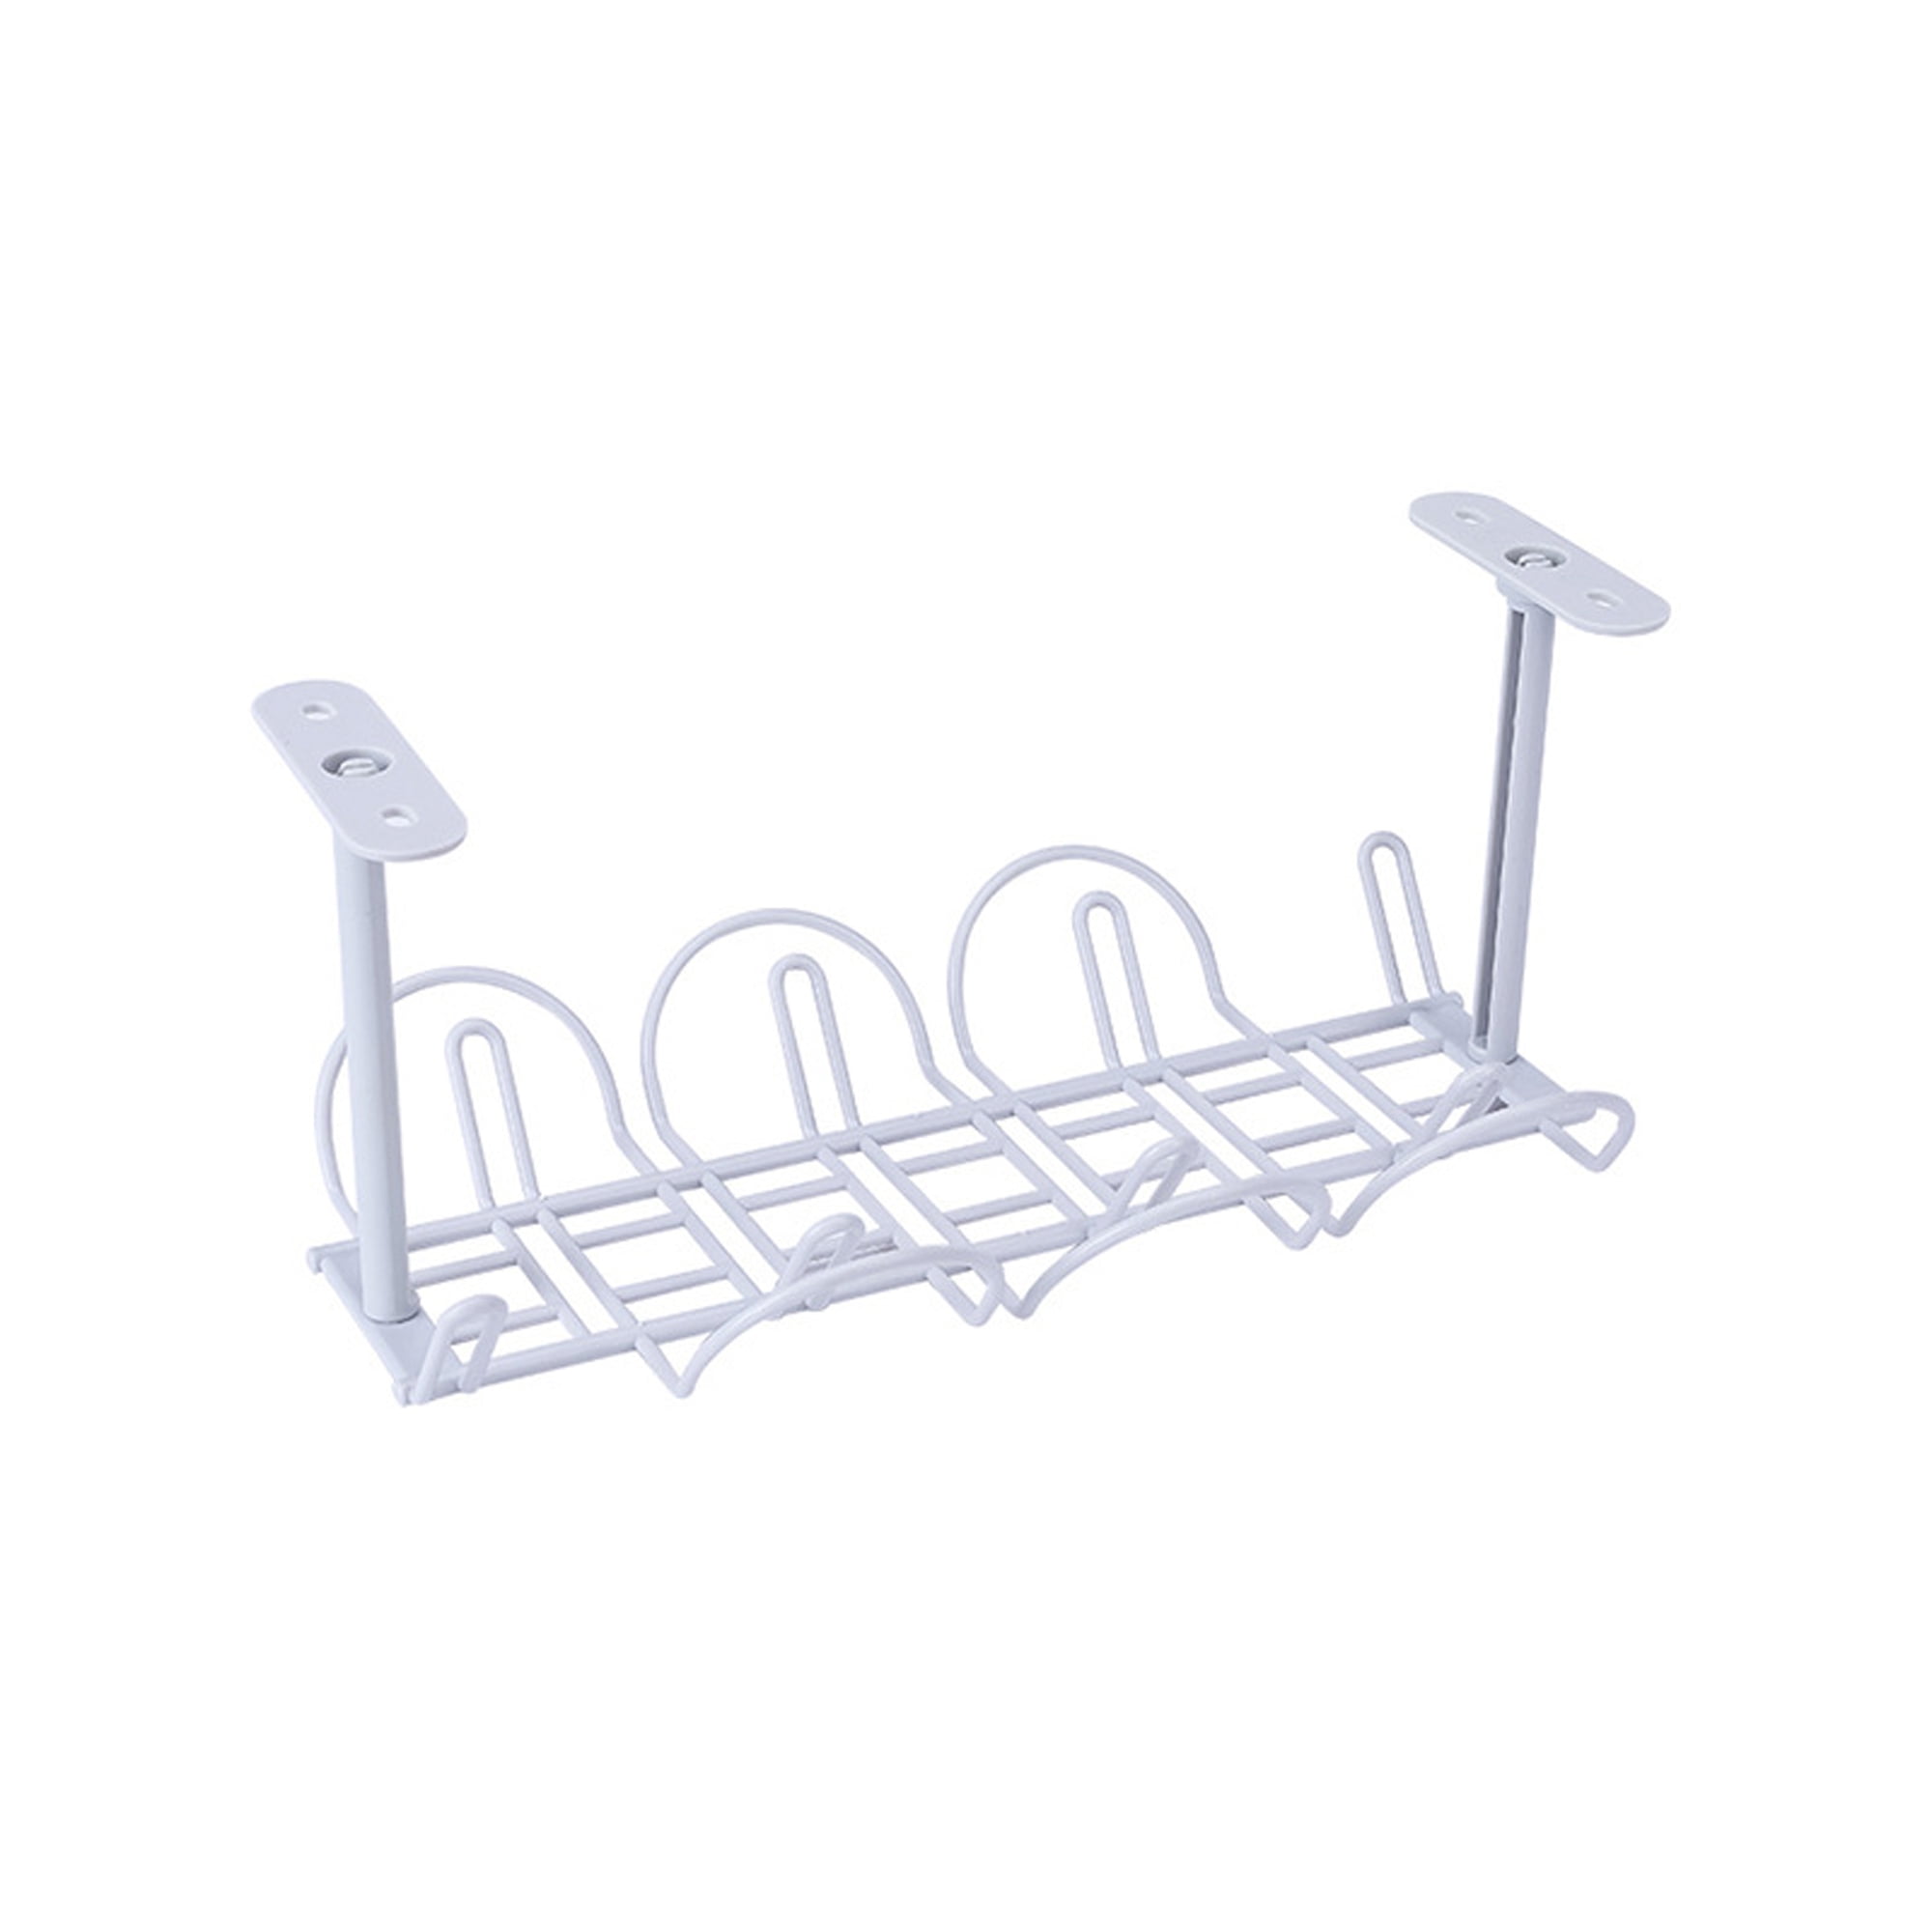 Cable Tray  Wire Mesh, Ladder Tray and More Wire Management Baskets &  Accessories